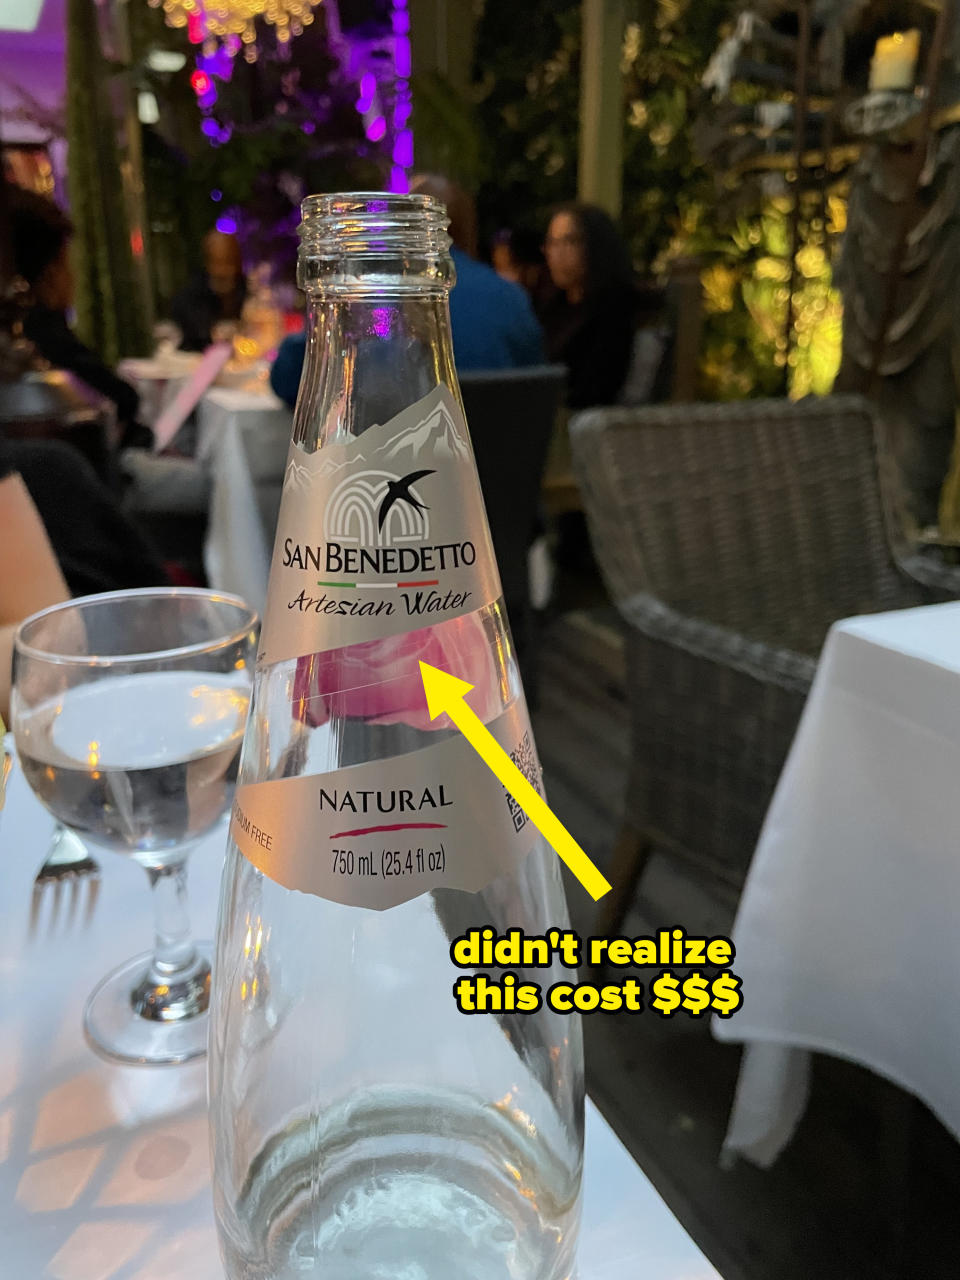 A shot of the bottled water on the table